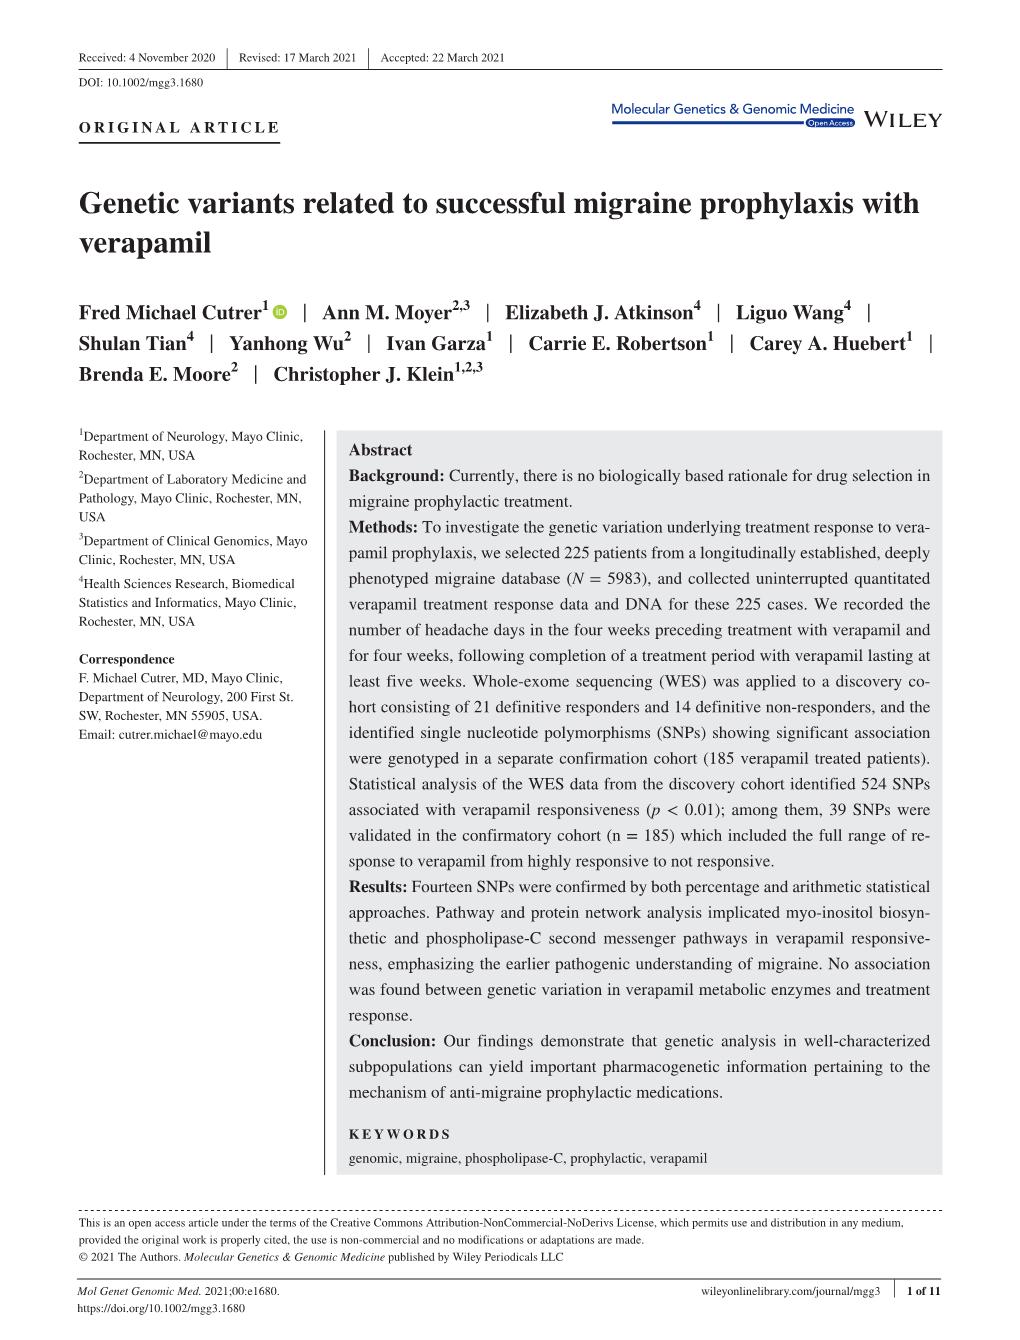 Genetic Variants Related to Successful Migraine Prophylaxis with Verapamil